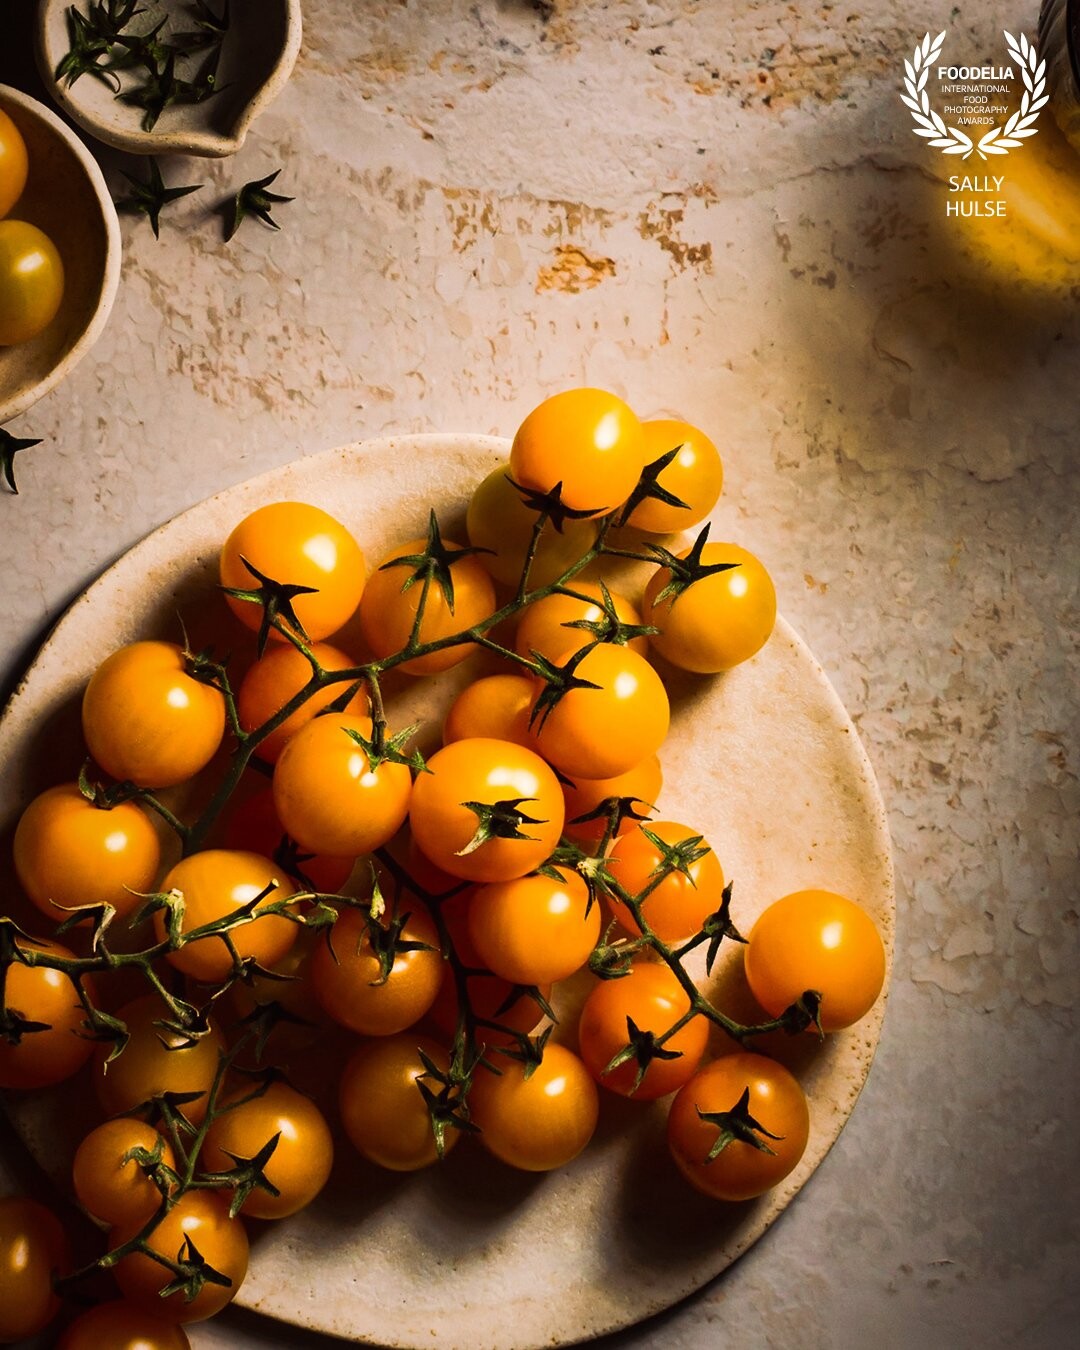 ‘Summer Tomatoes’<br />
The goal here was for a moody shot that helped convey the warmth of summer, the richness of the beautiful flavour of these cherry tomatoes, and the rustic feel of a Tuscan kitchen in the late afternoon.